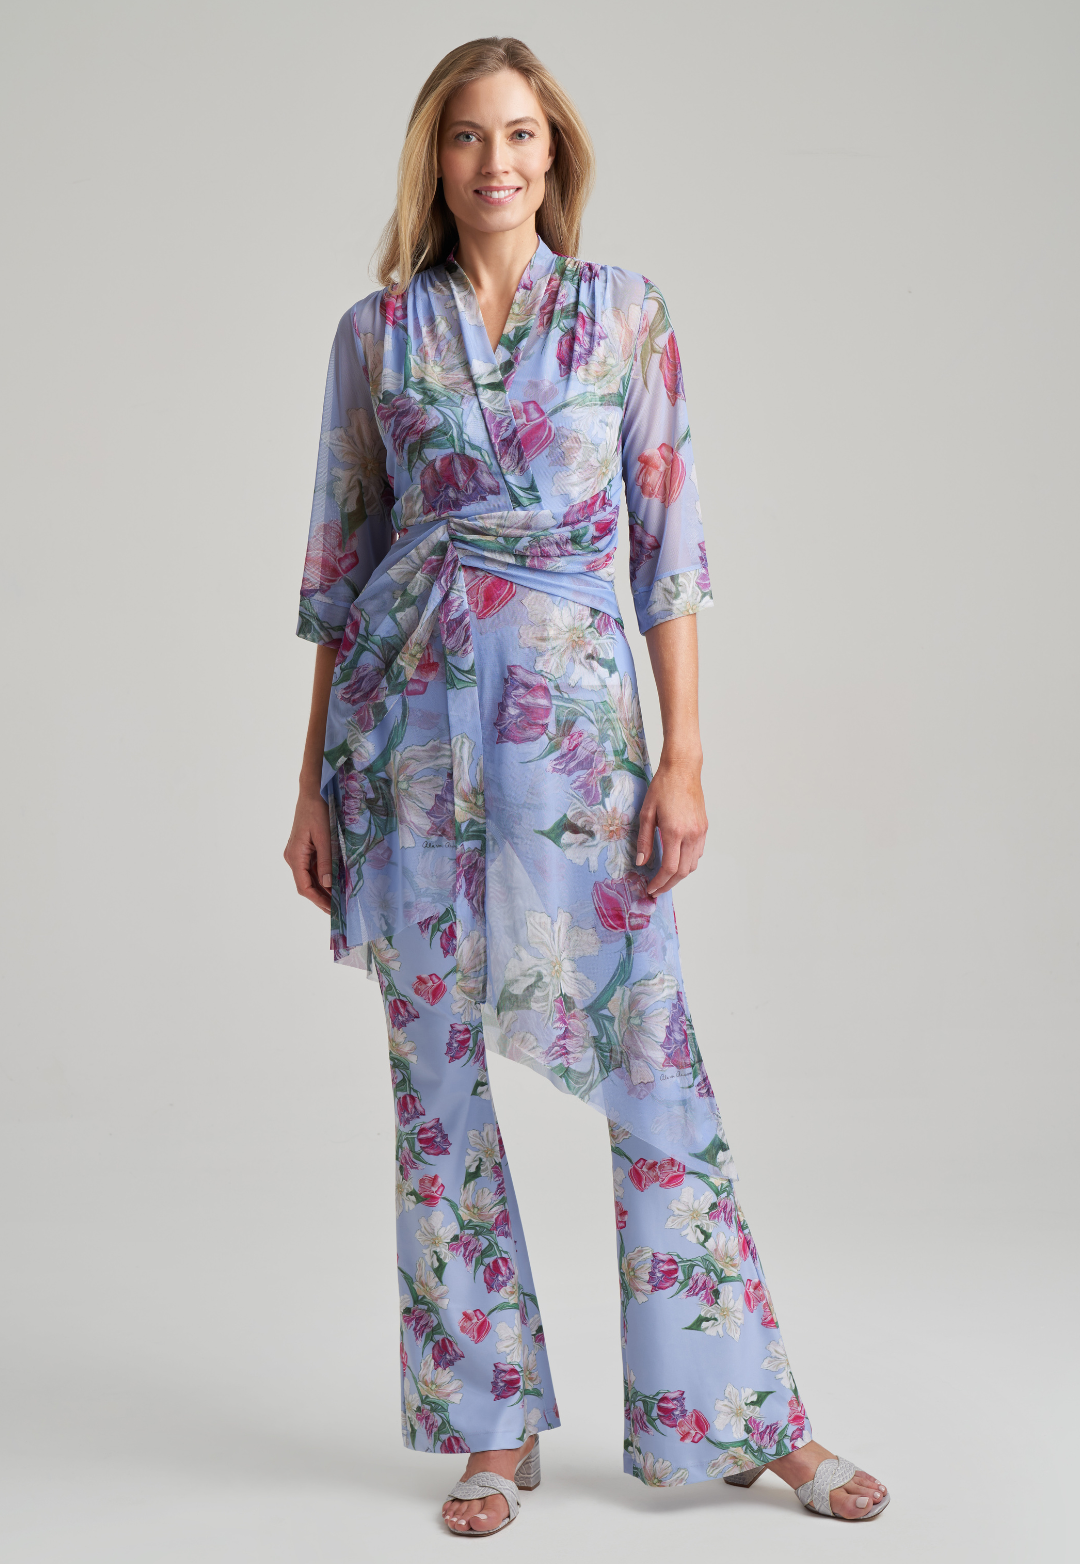 Women wearing mesh tulip printed purple kimono over stretch knit pants and tank top in tulips by Ala von Auersperg for spring summer 2021